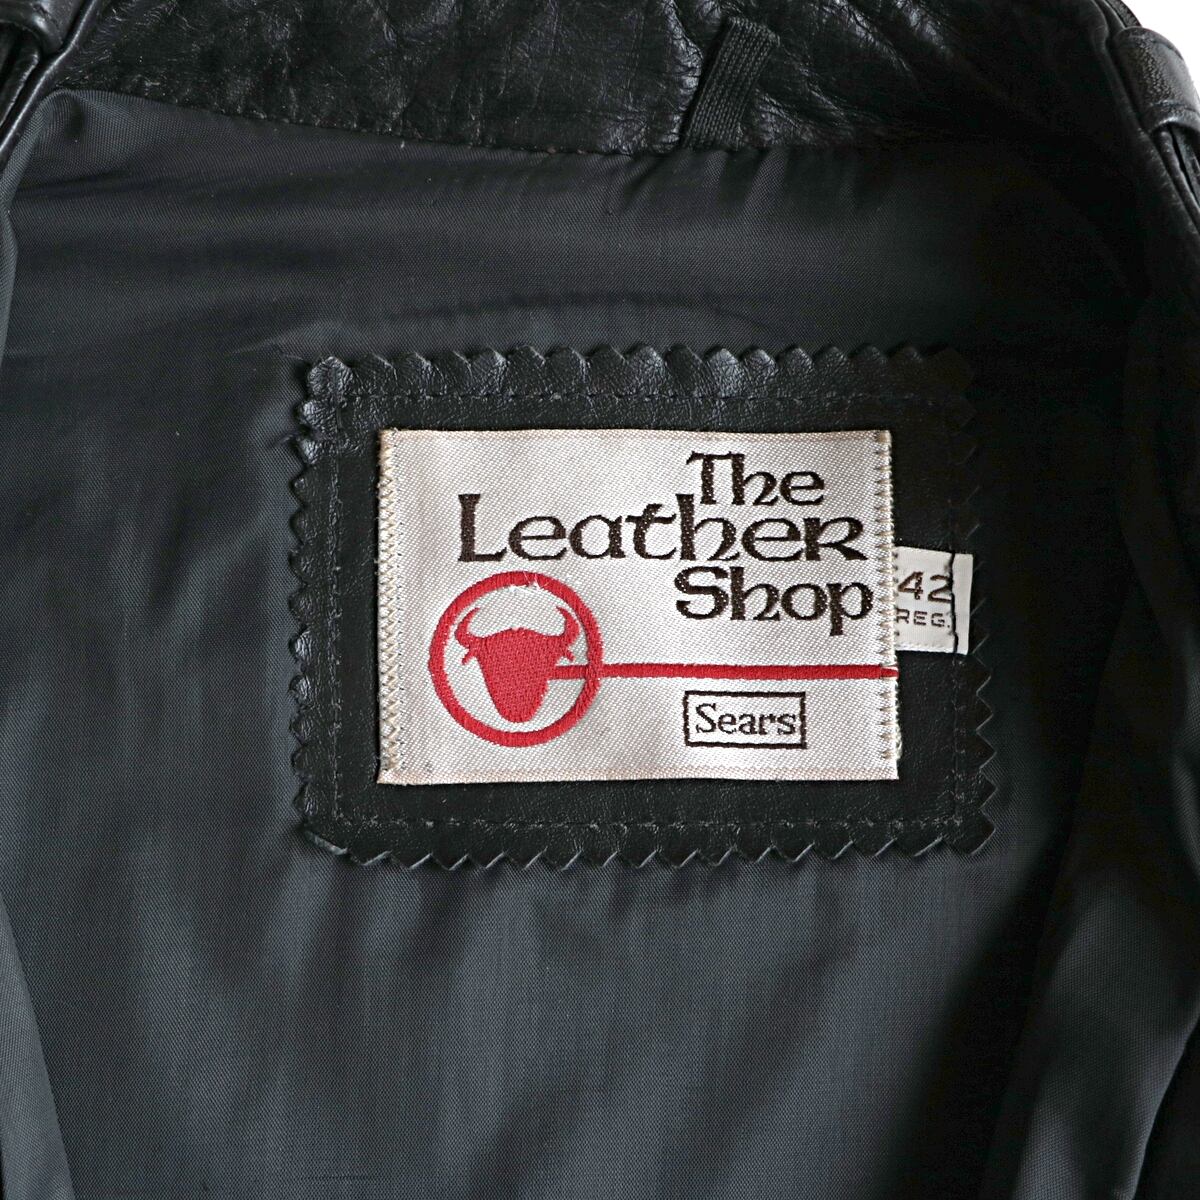 70s vintage sears ”the leather shop” シングル レザー ライダース